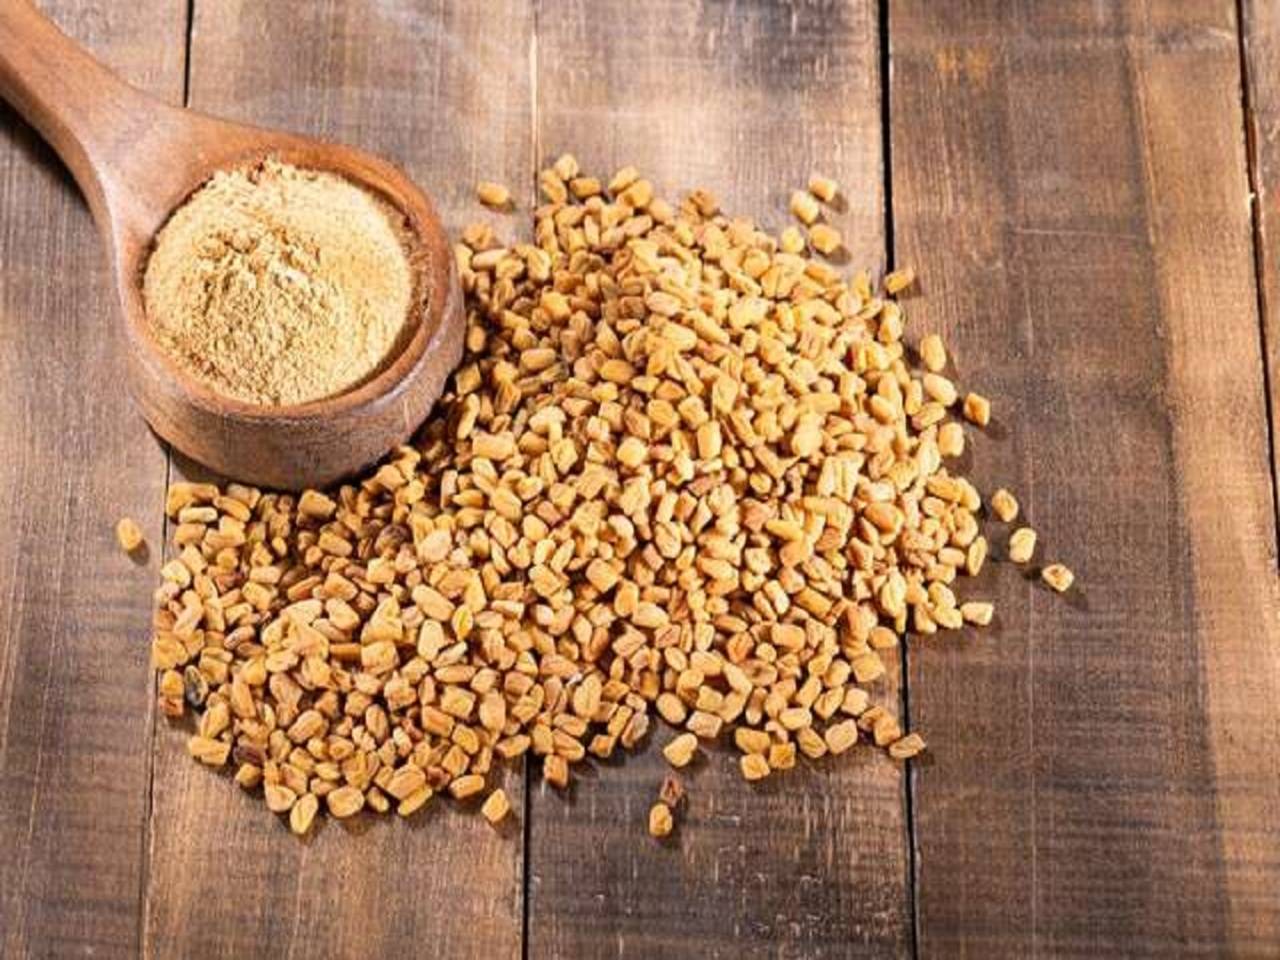 Methi powder for dandruff-free, strong hair - Times of India